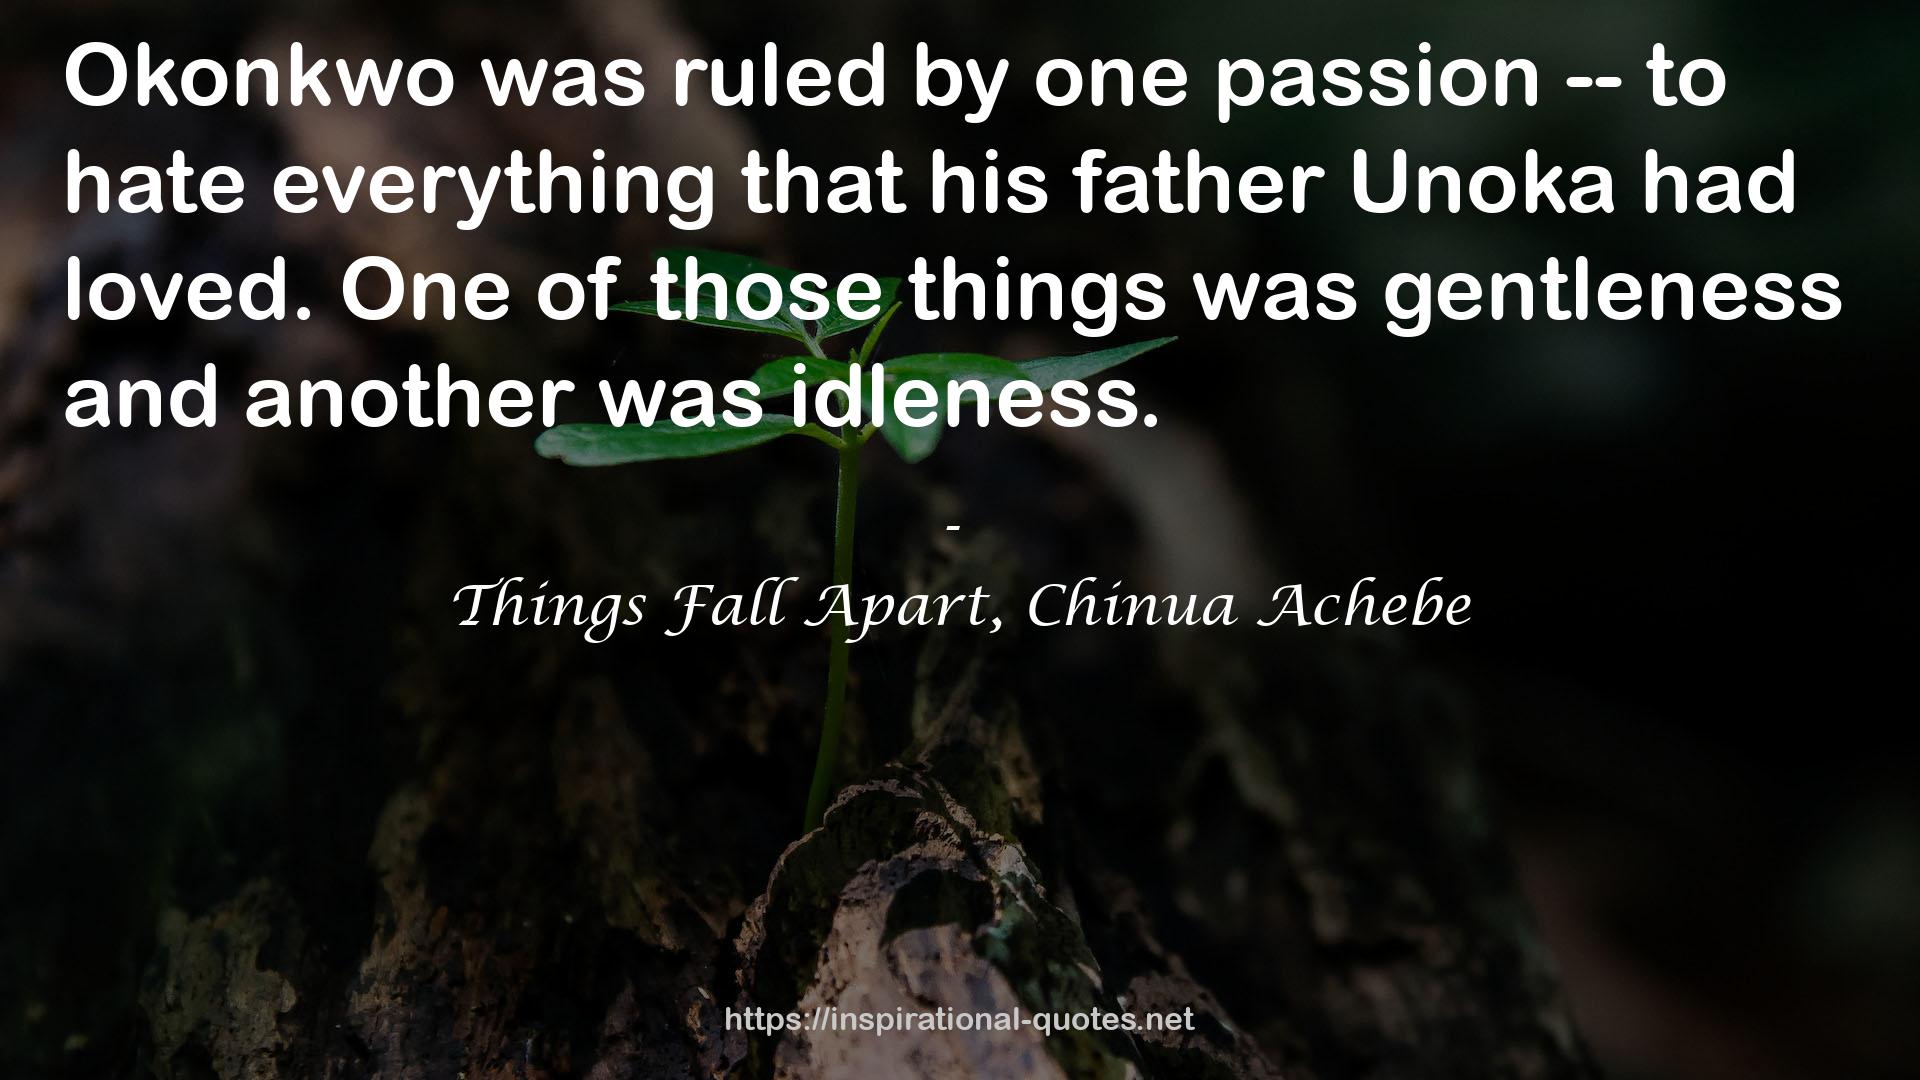 Things Fall Apart, Chinua Achebe QUOTES